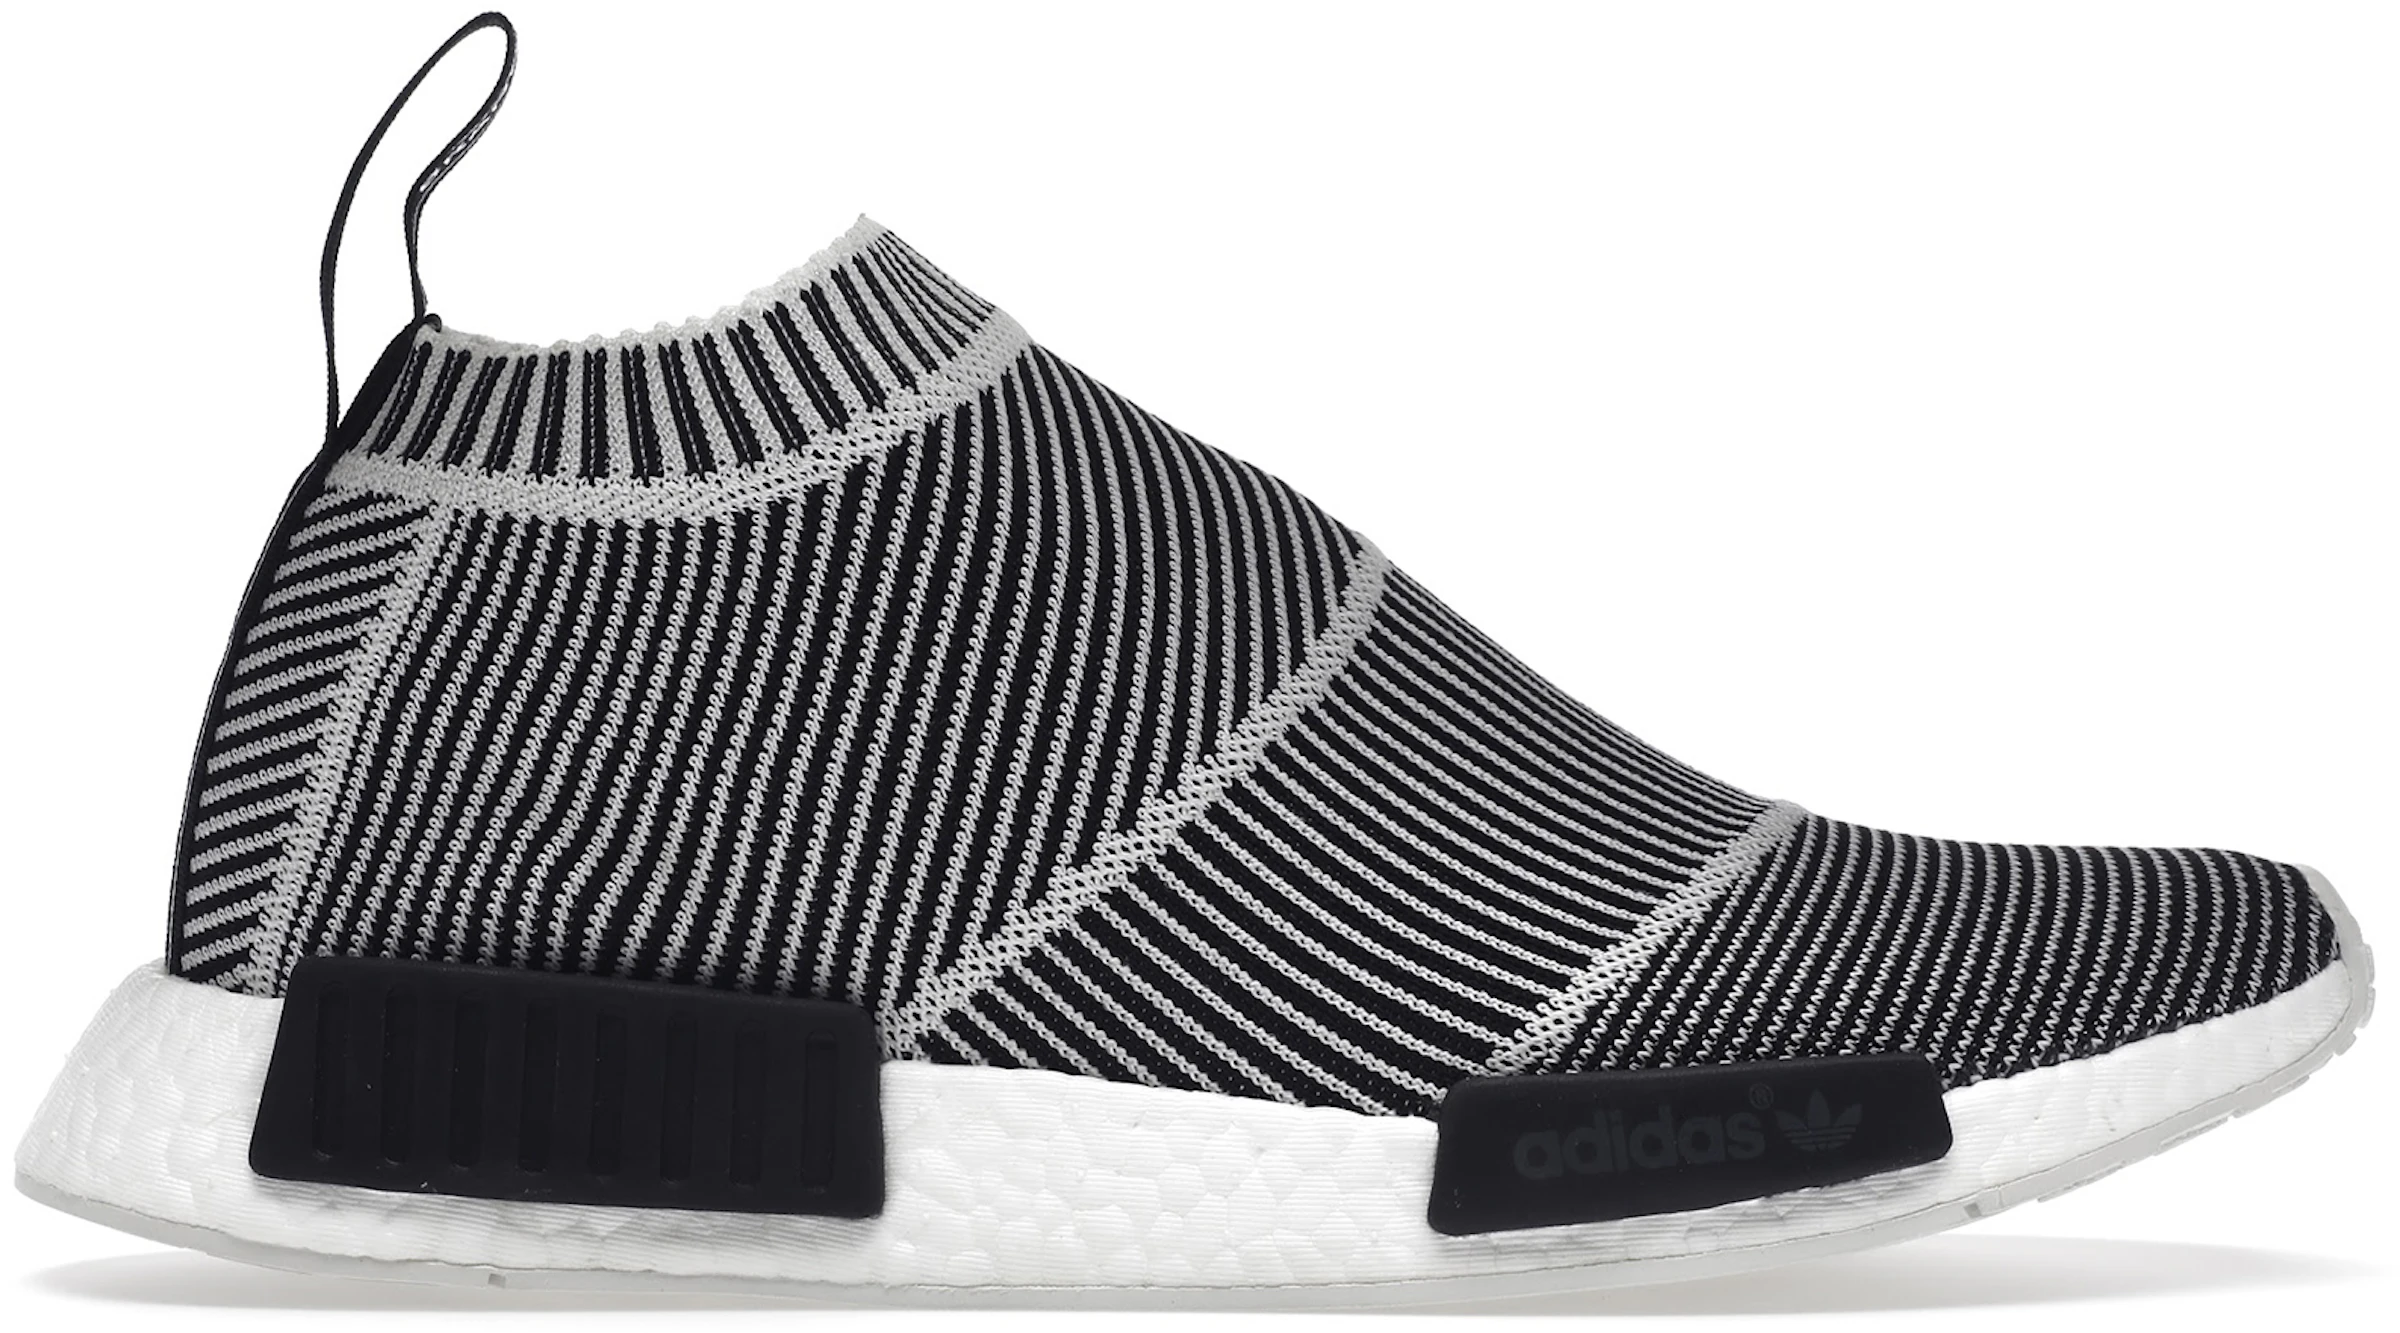 Buy Adidas Nmd Cs1 Shoes & New Sneakers - Stockx